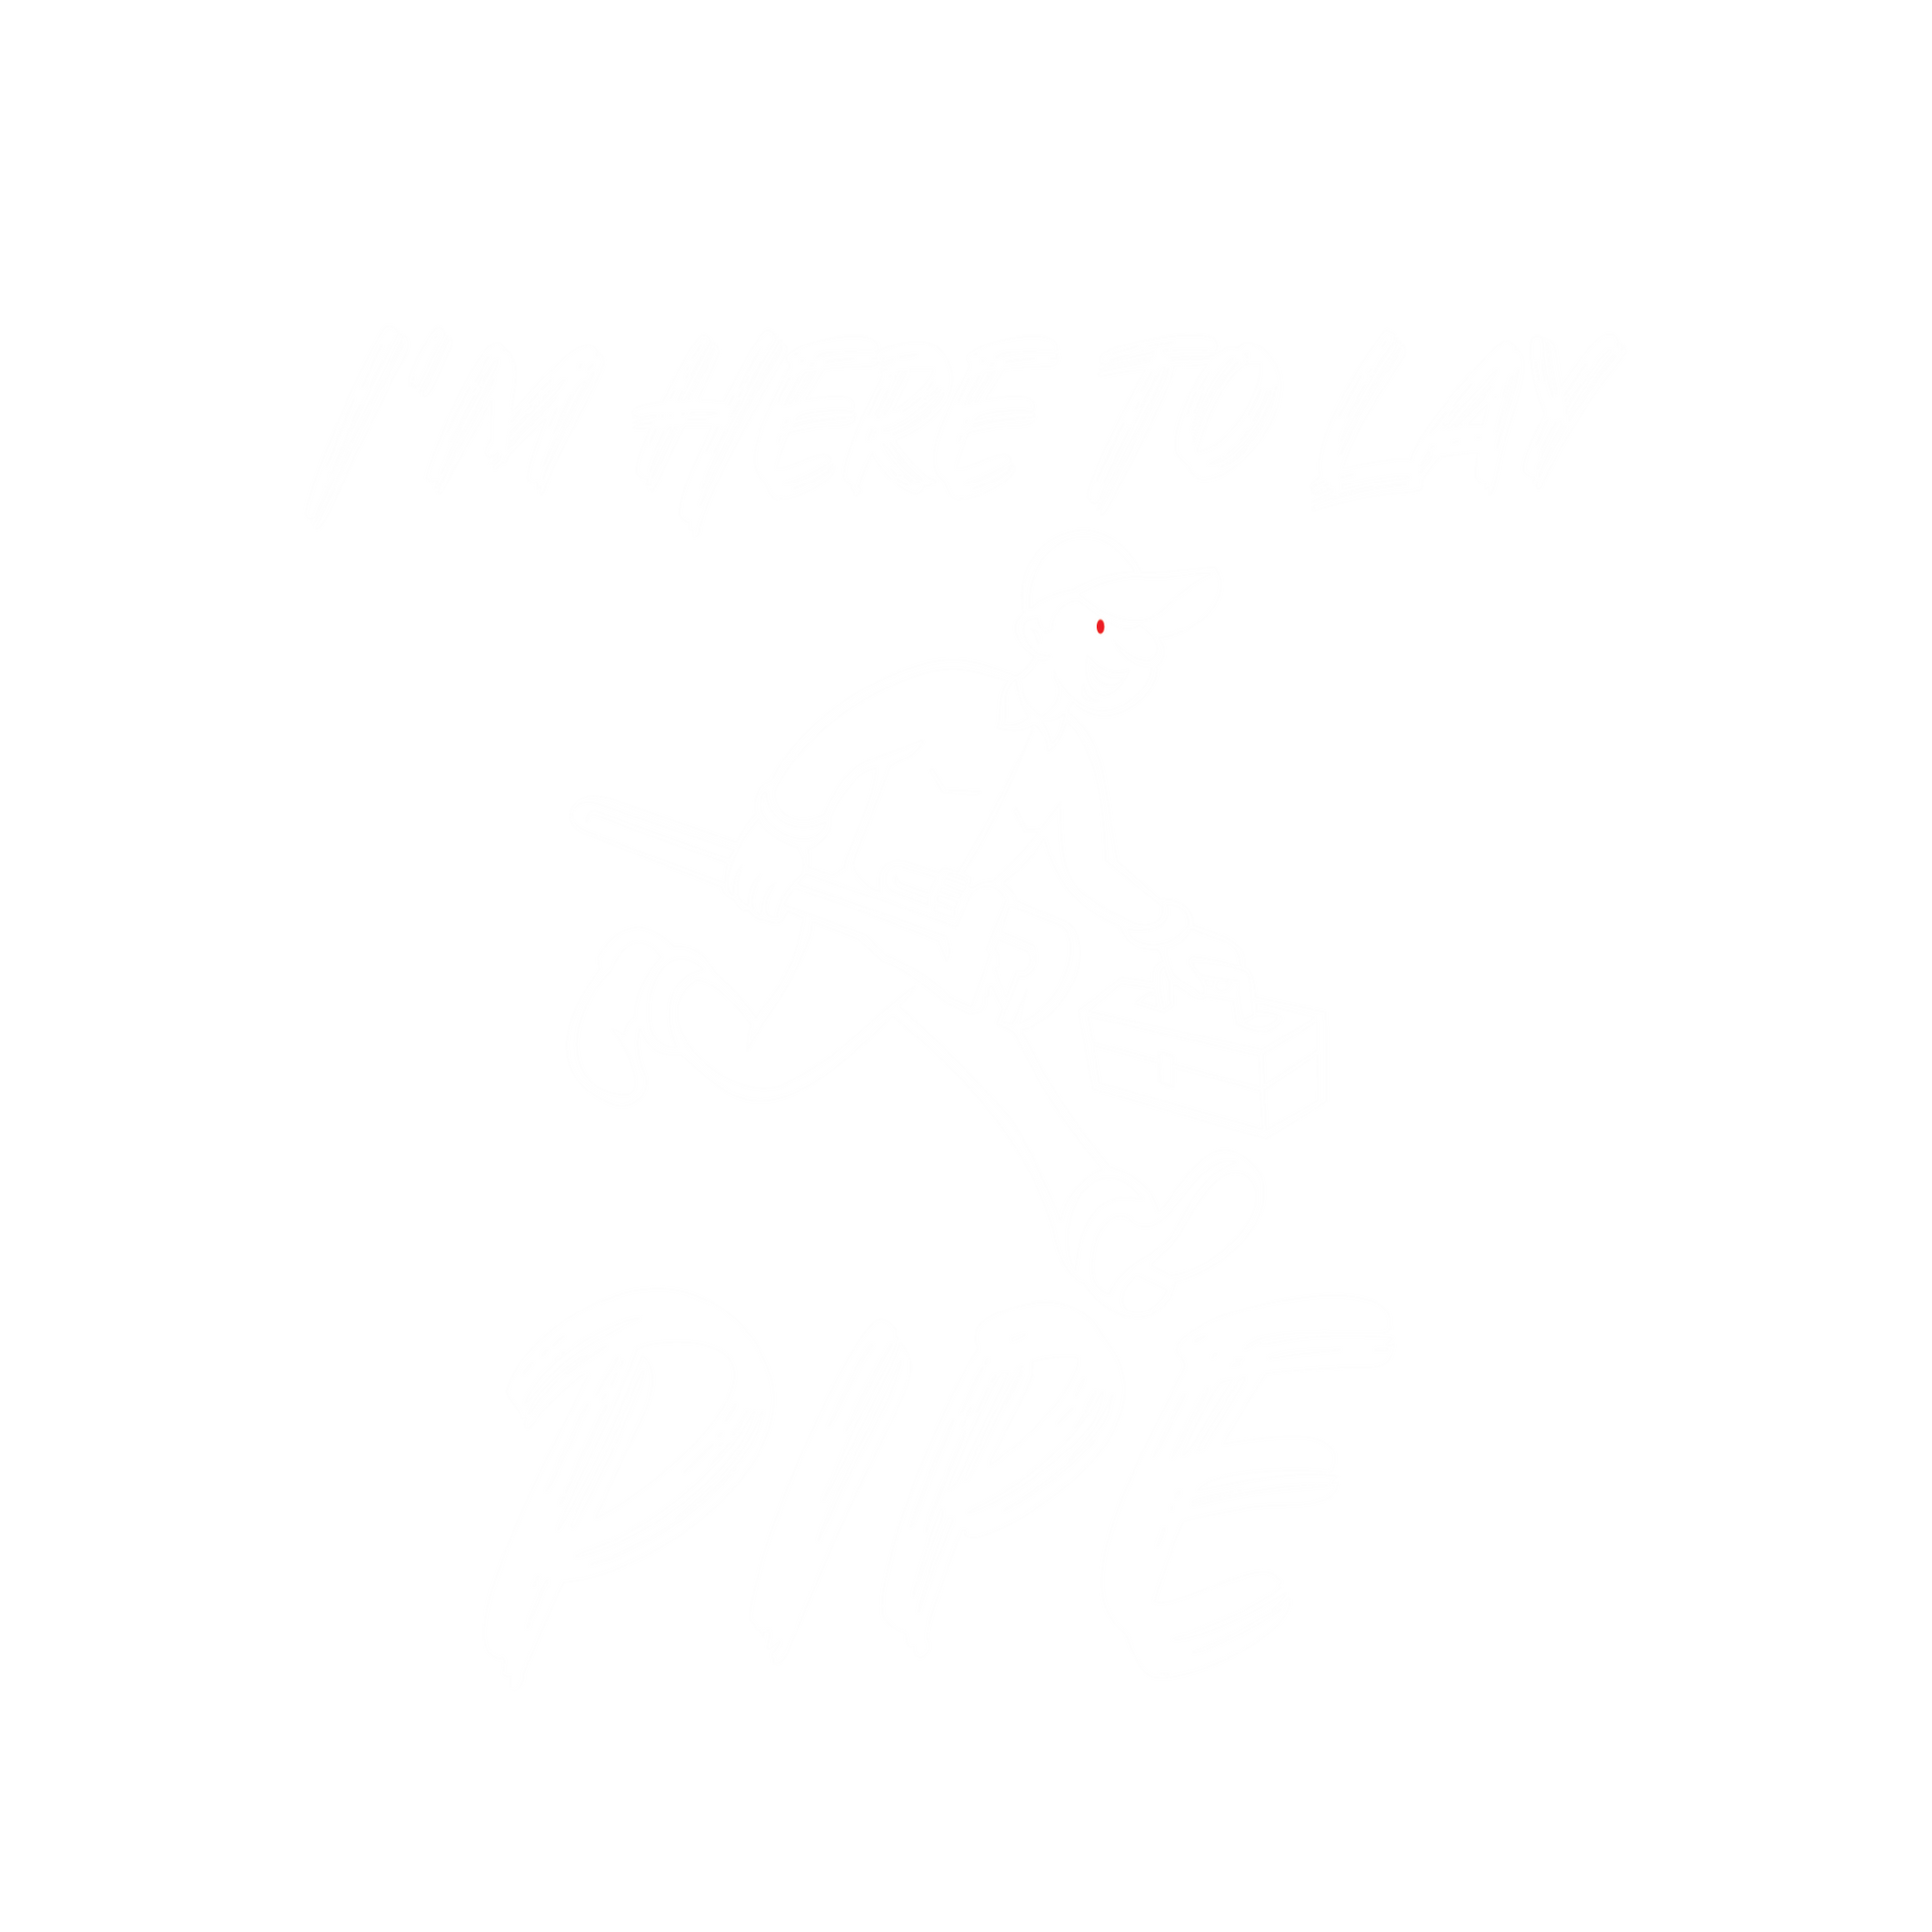 I'm Here To Lay Pipe